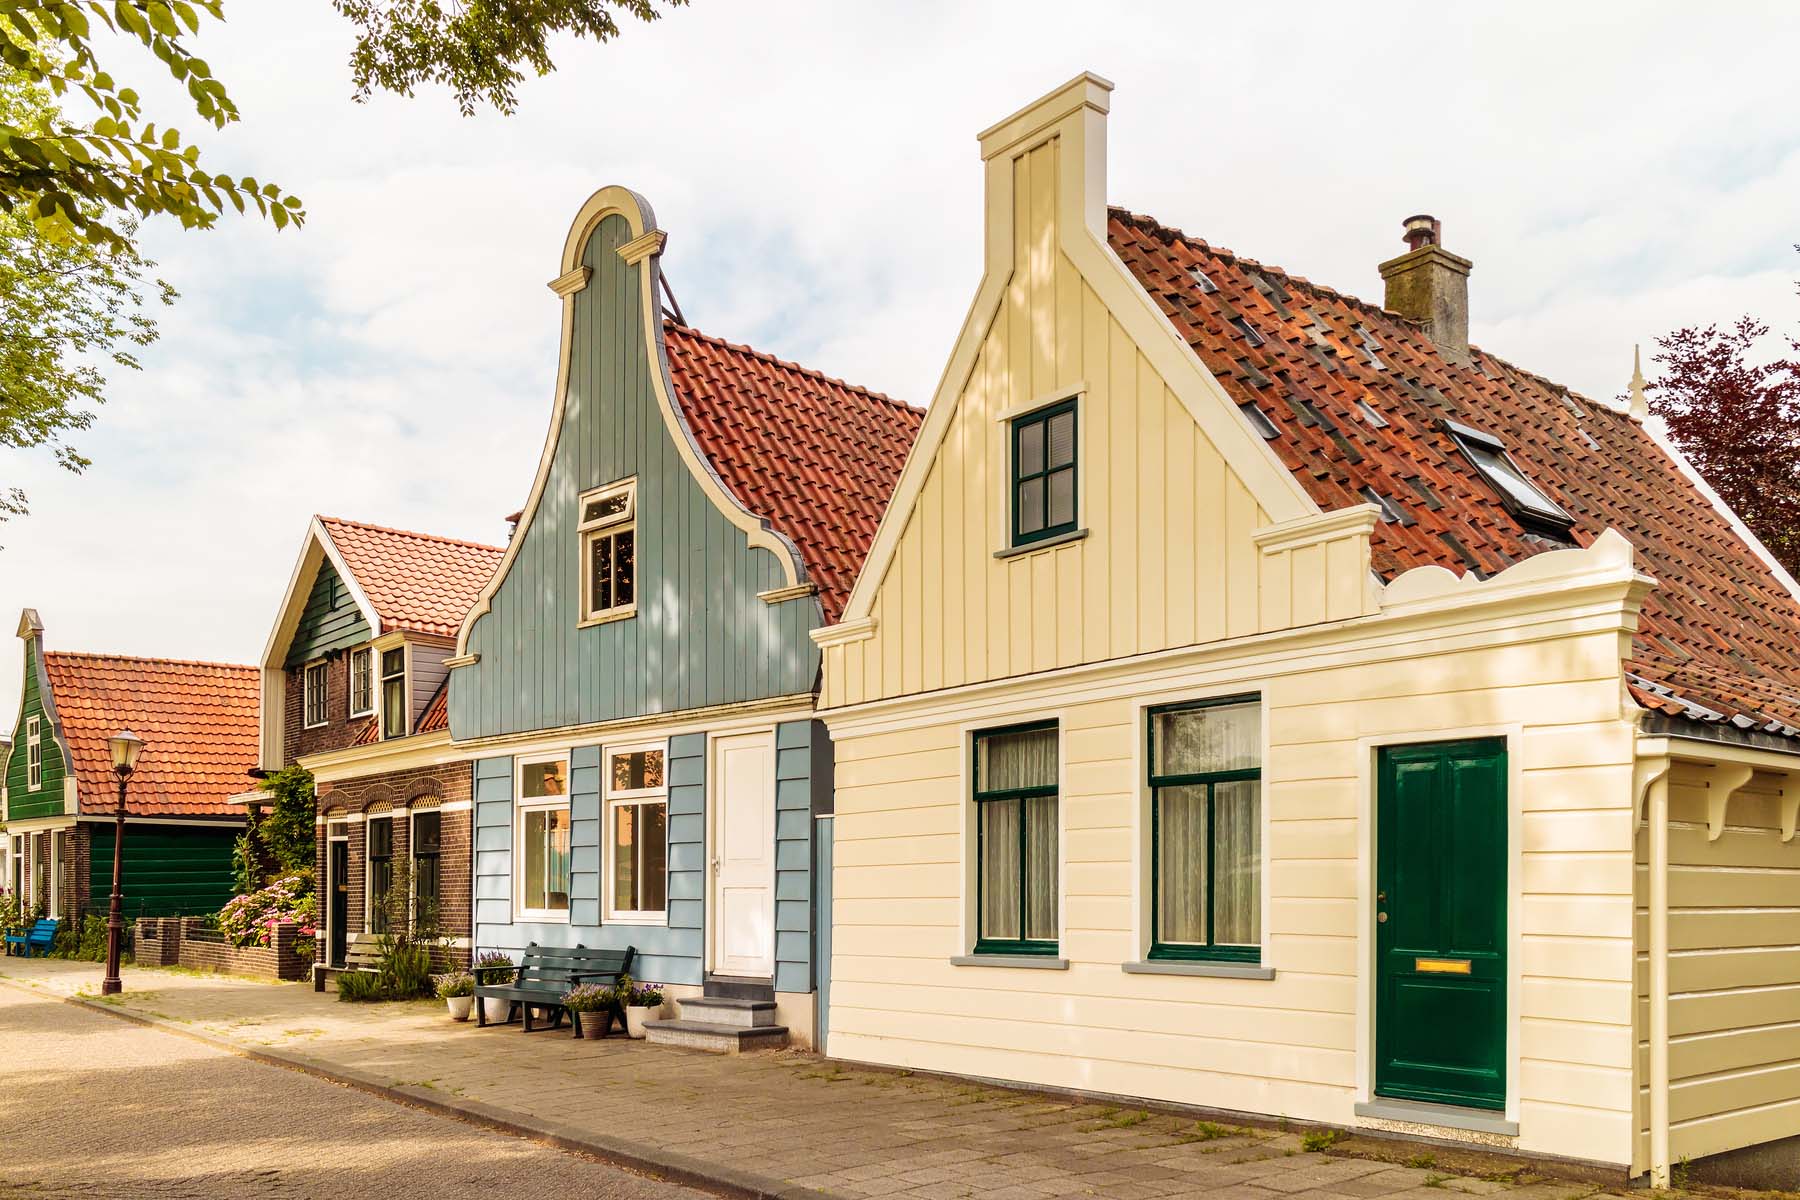 exterior of traditional wooden houses in Amsterdam Noord